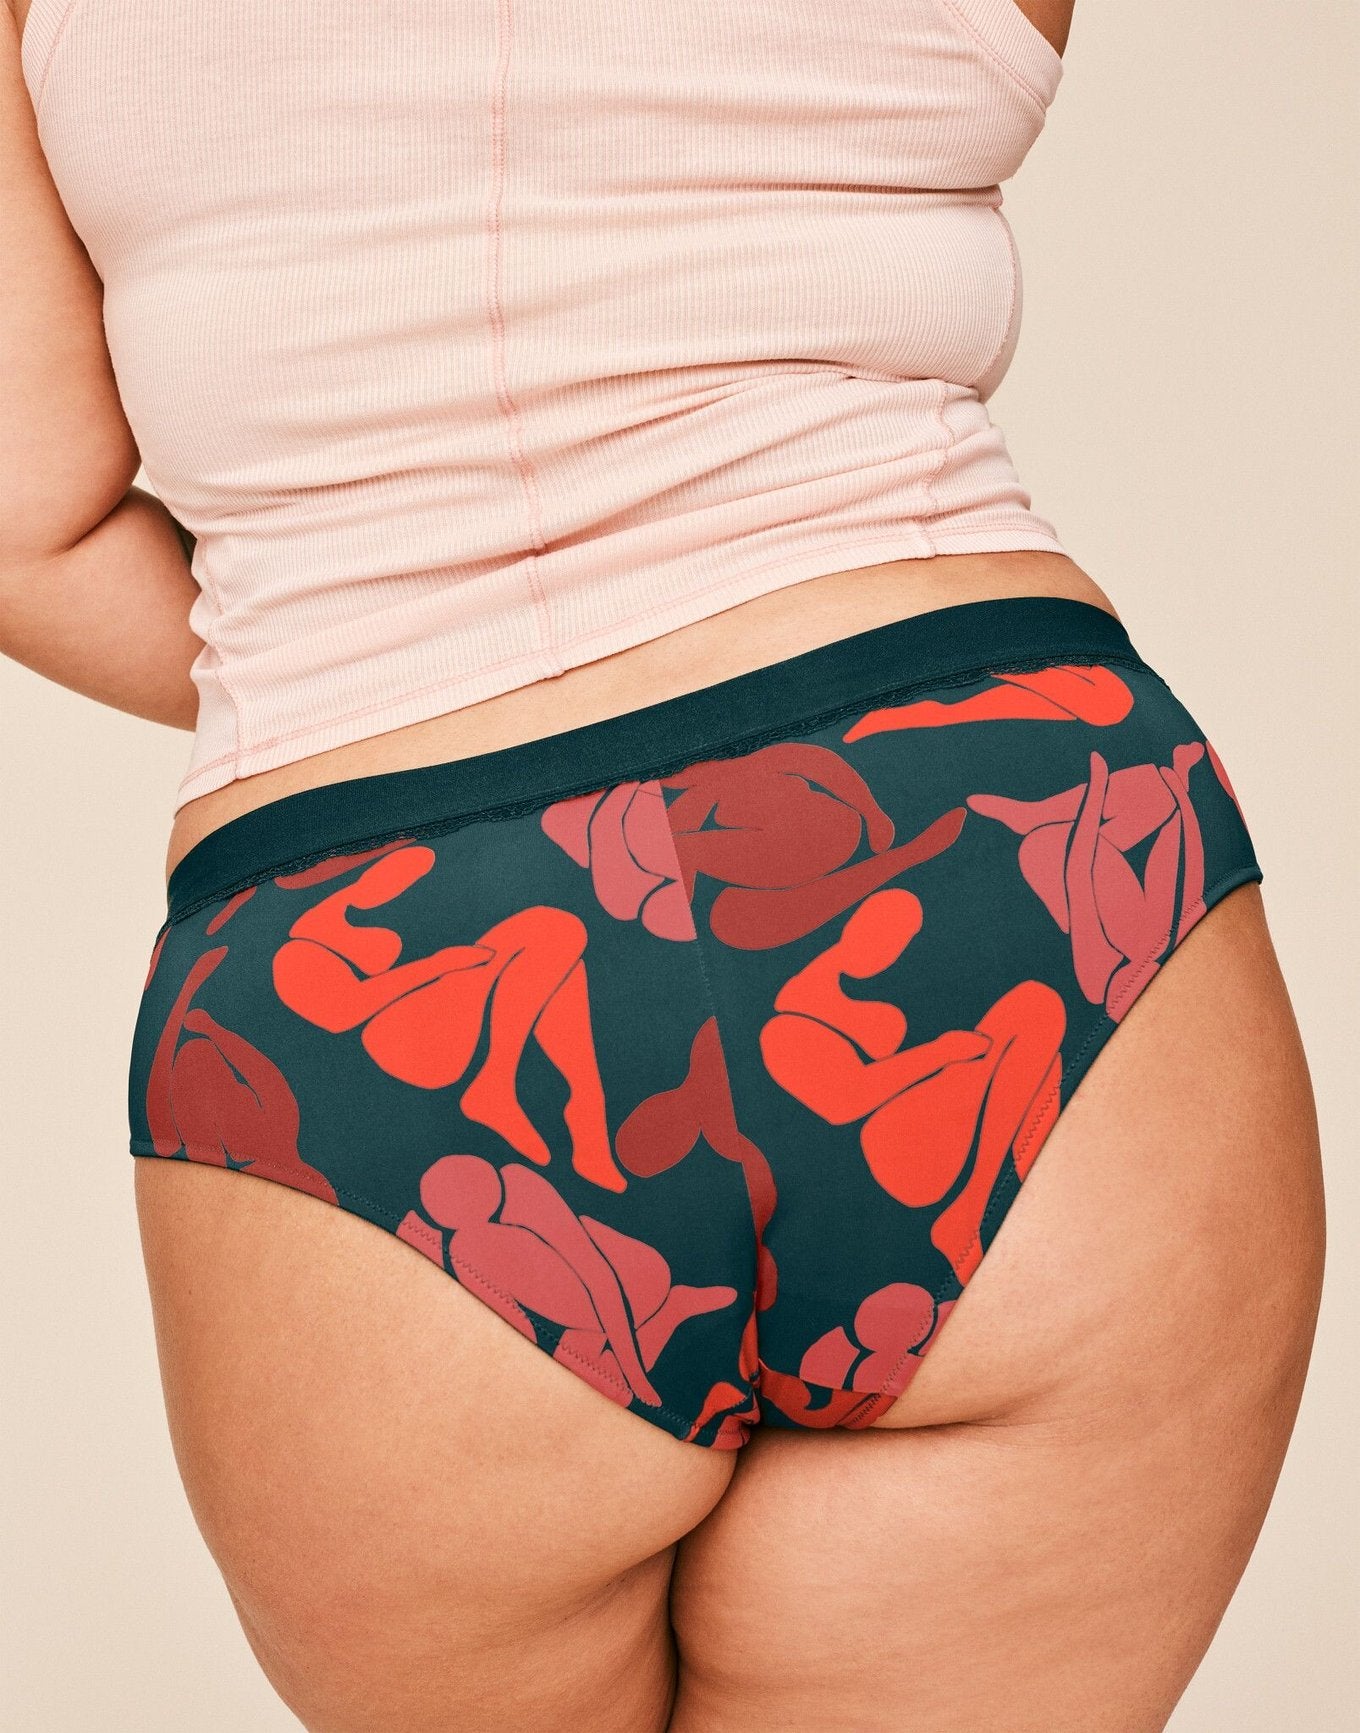 Royce Lingerie Women's Poppy Coordinating Brief Panty, Coral Print